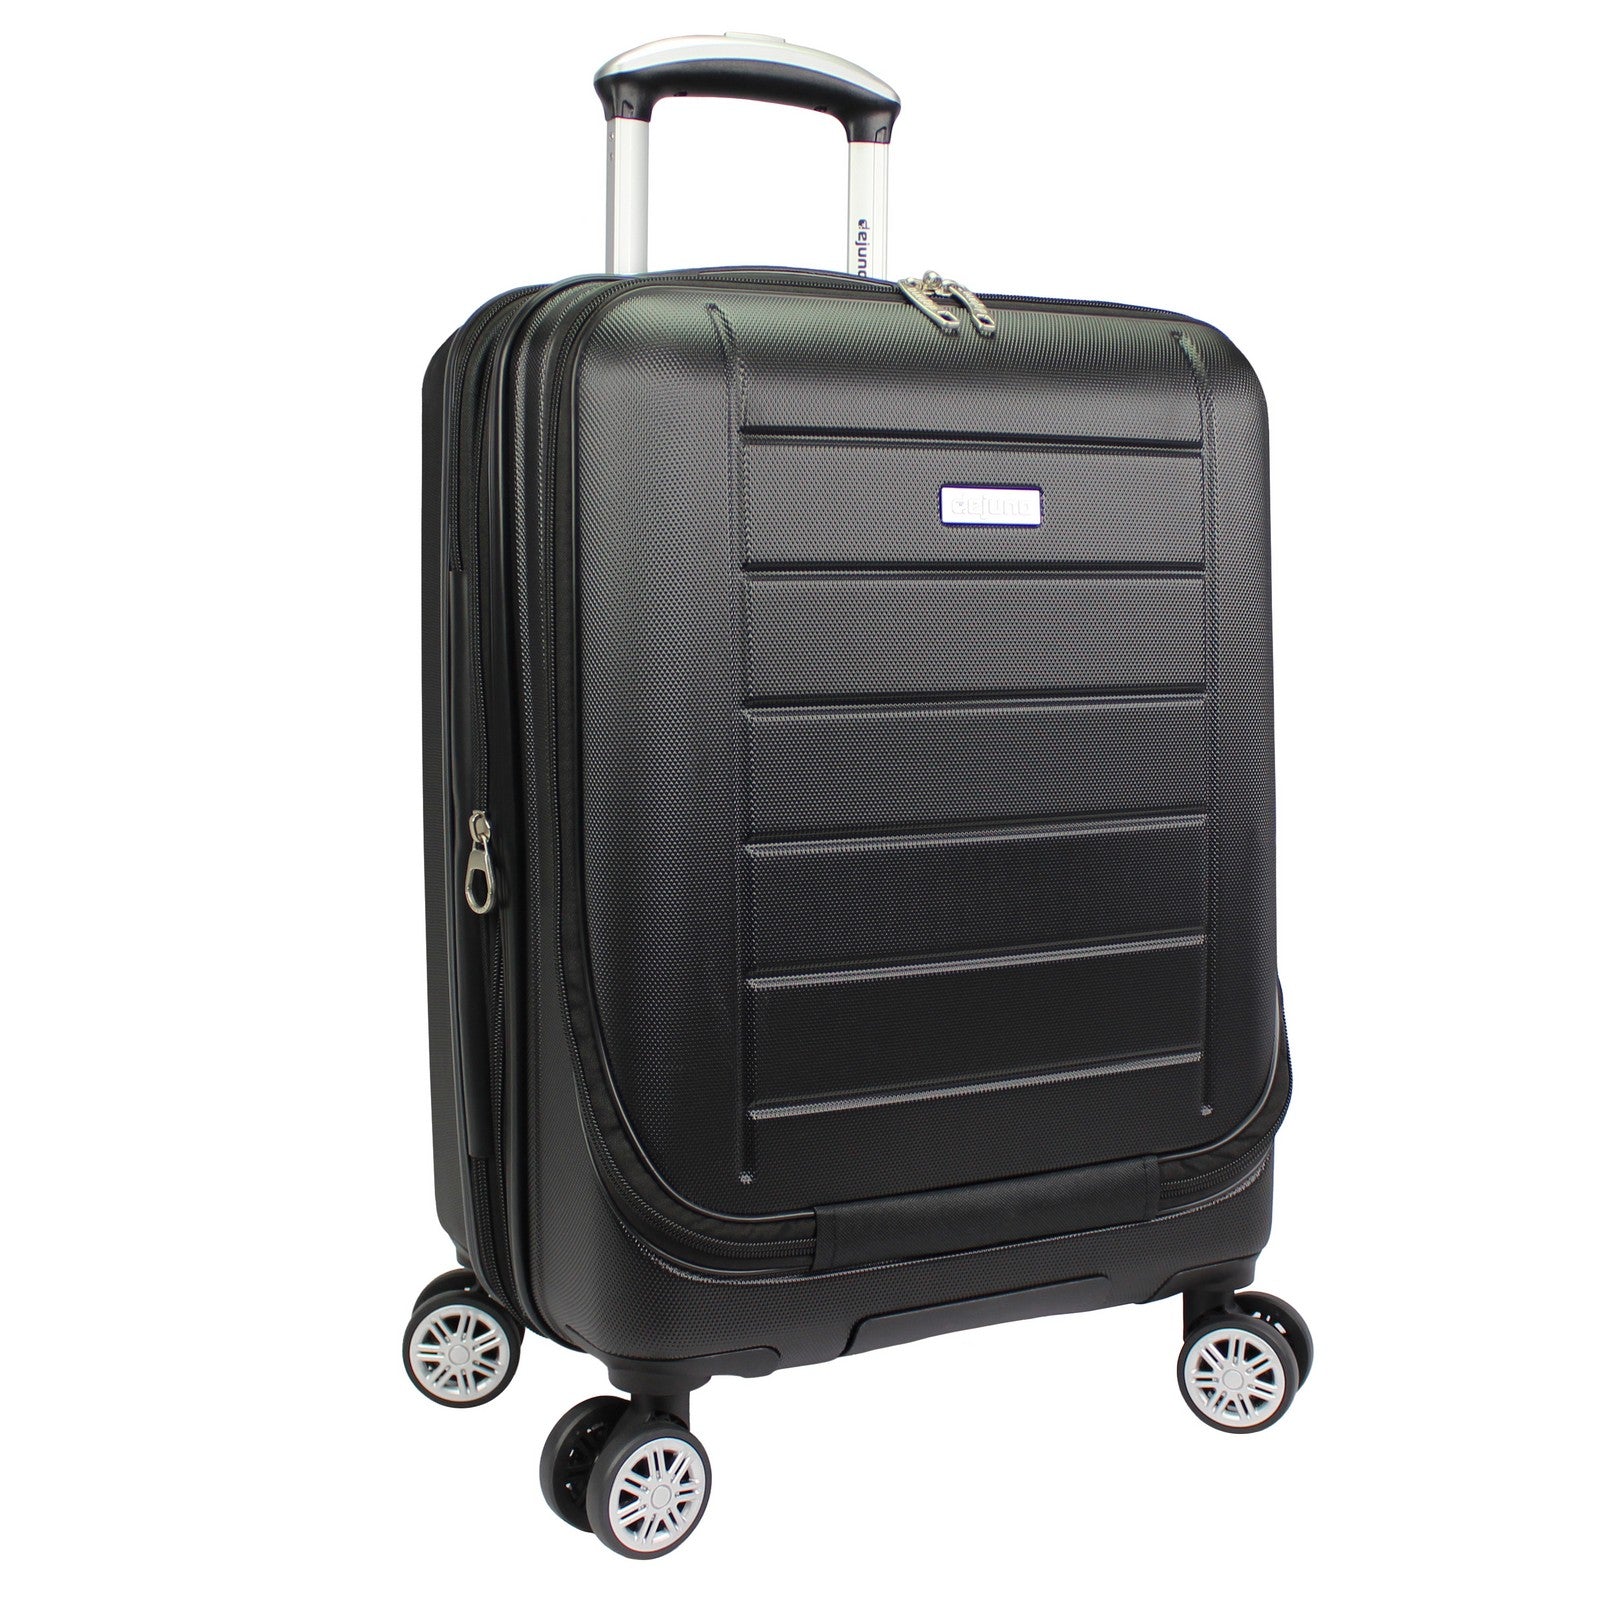 World Traveler Dejuno Compact 20" Carry-on Suitcase with Laptop Pocket